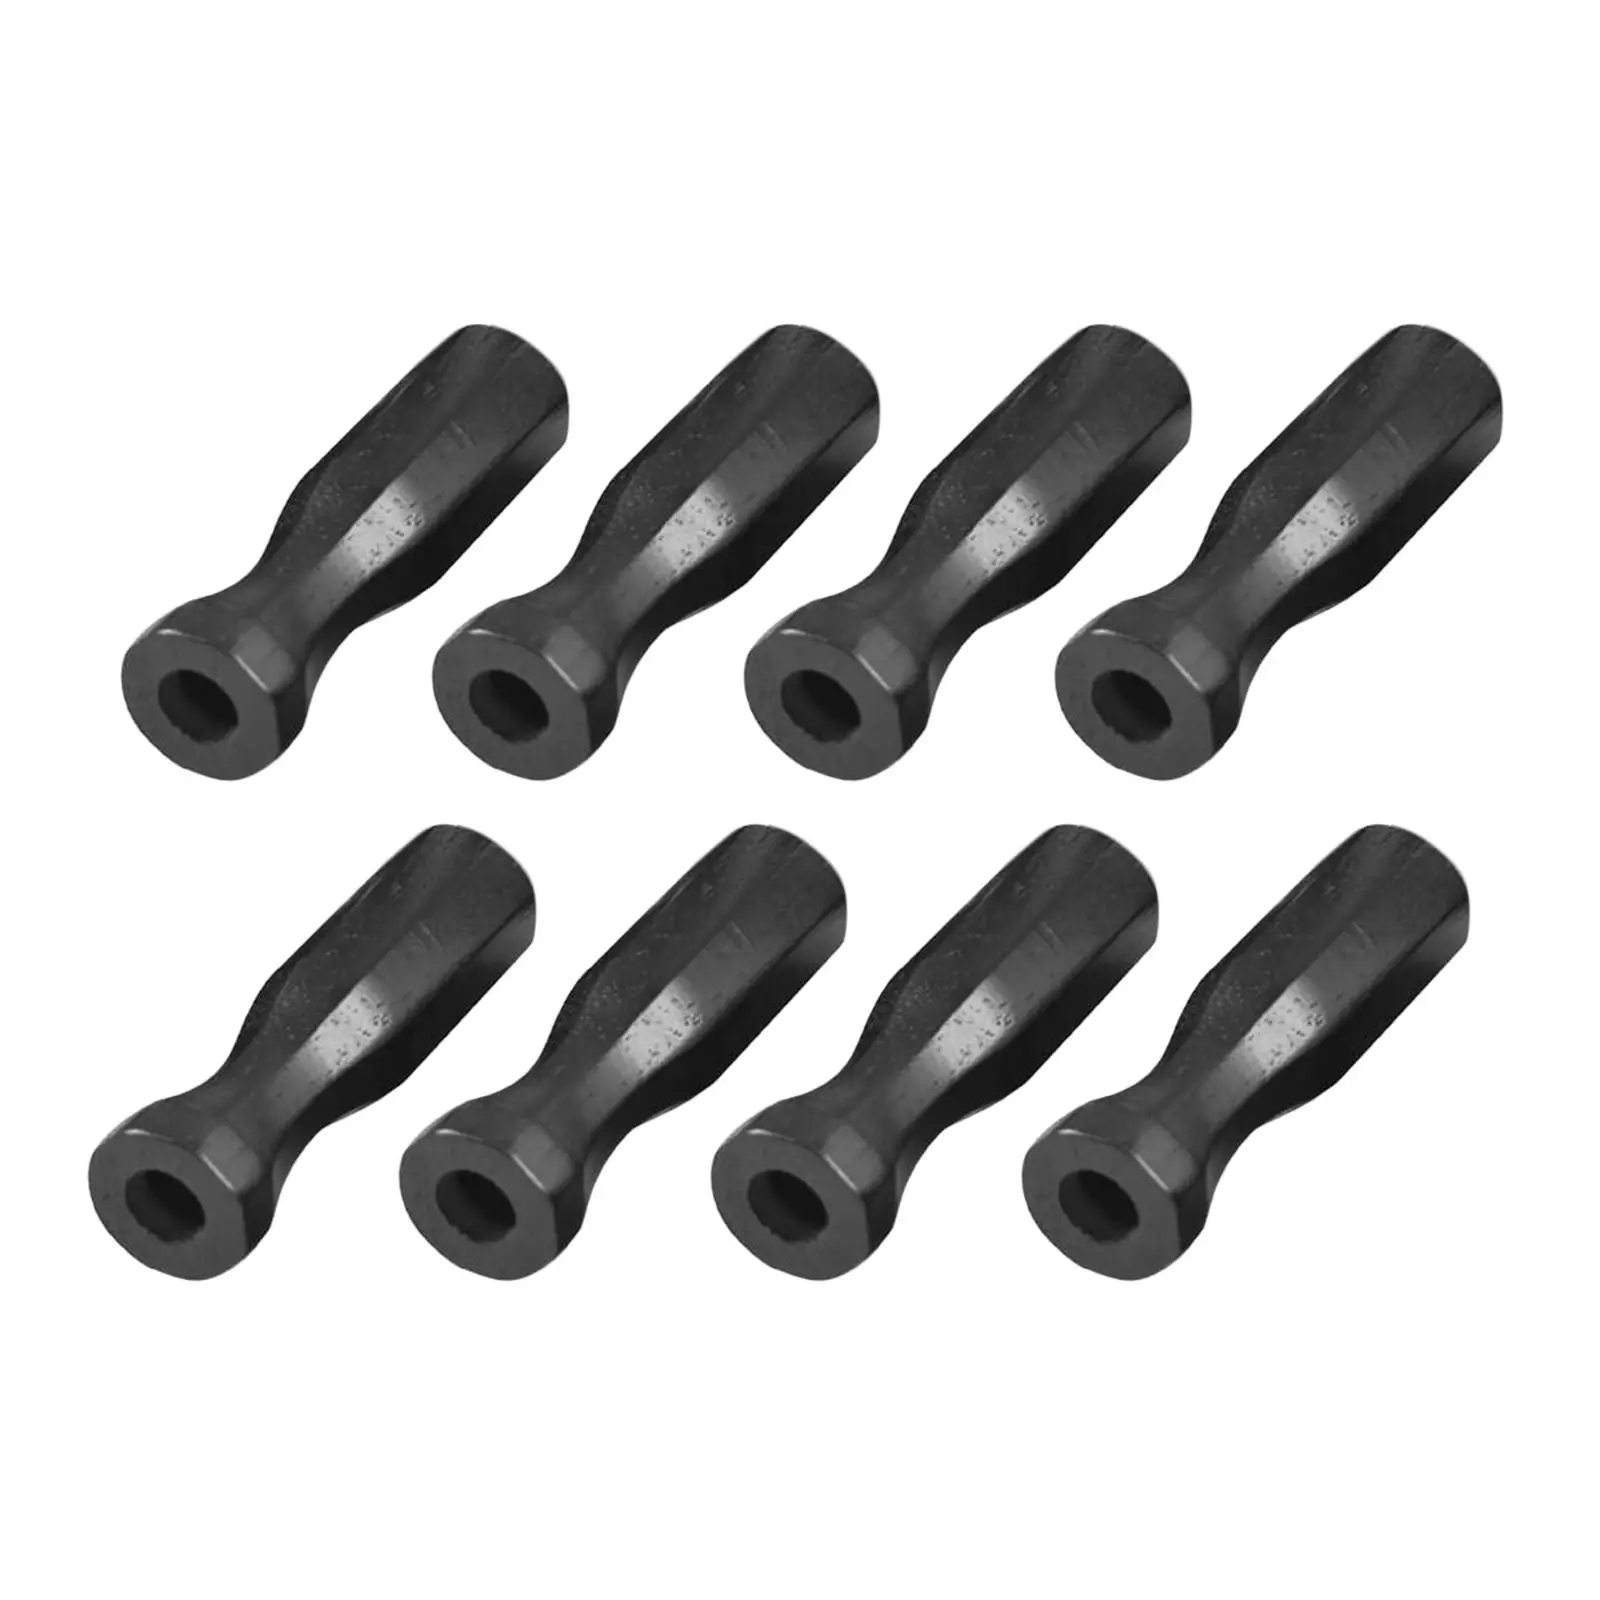 8Pcs Soccer Table Grips Replacements Portable Part Non-Slip Handle Rod for Game